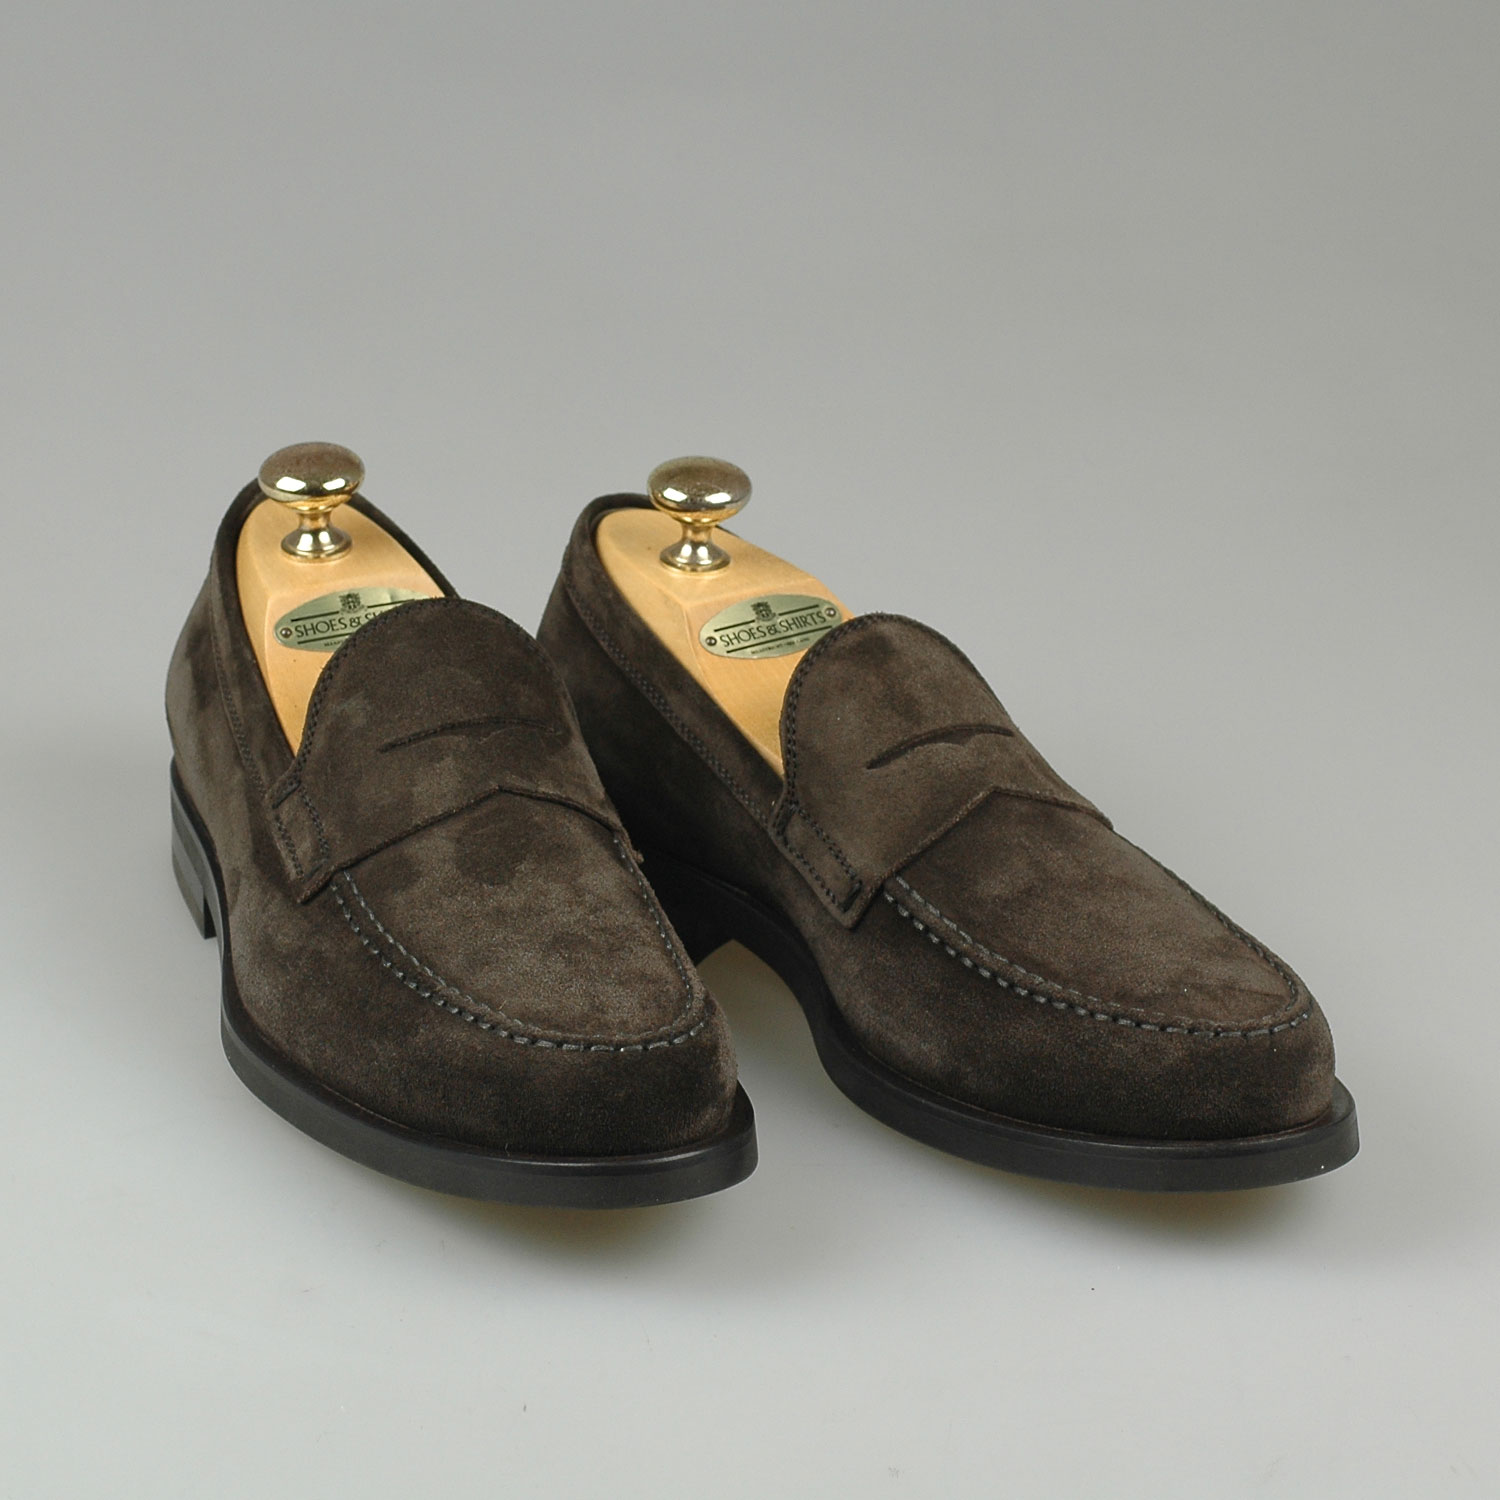 Shop Tod's Loafer suede online at Shoes & Shirts